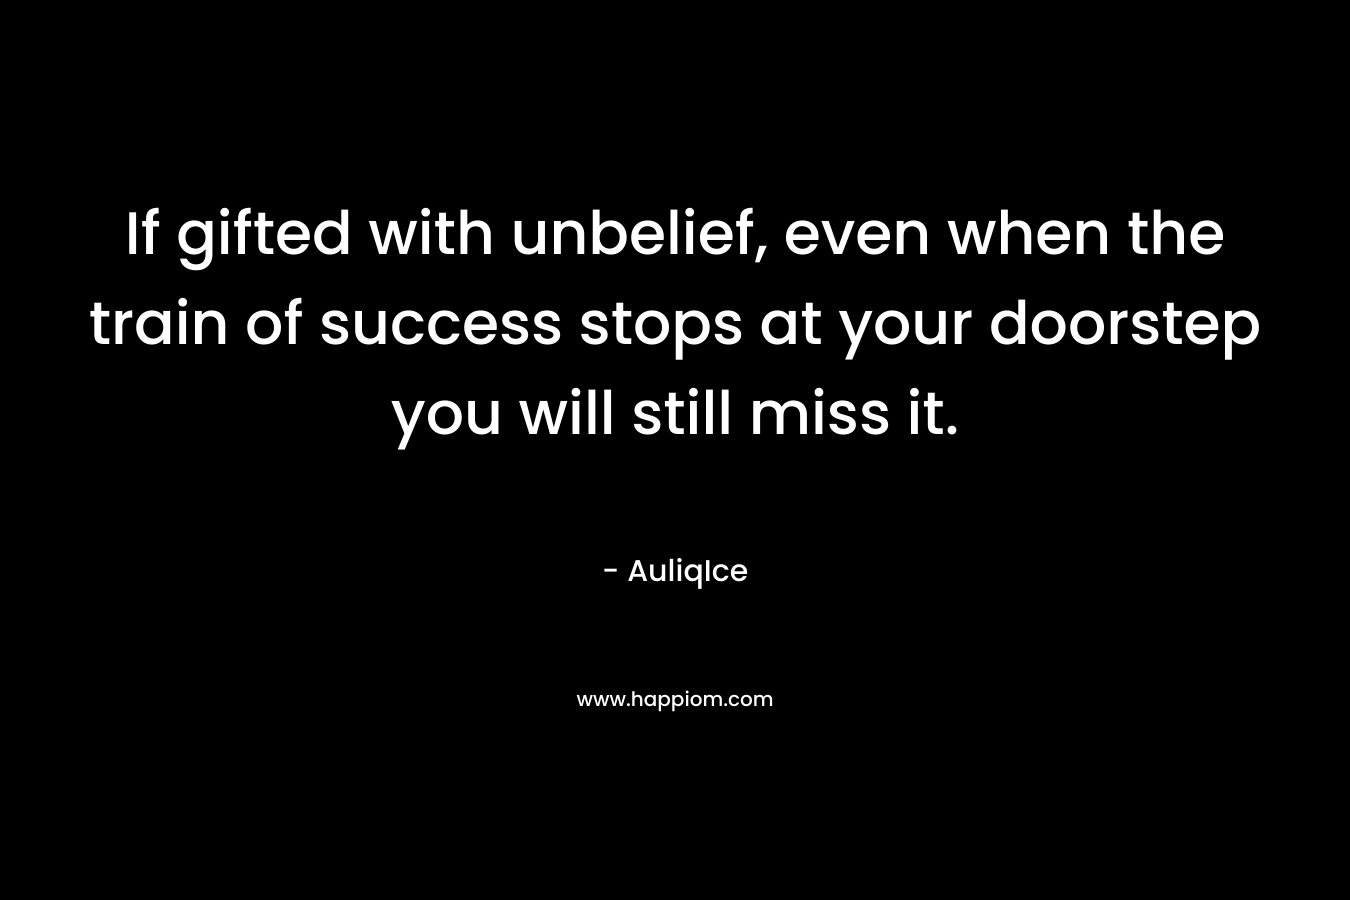 If gifted with unbelief, even when the train of success stops at your doorstep you will still miss it.